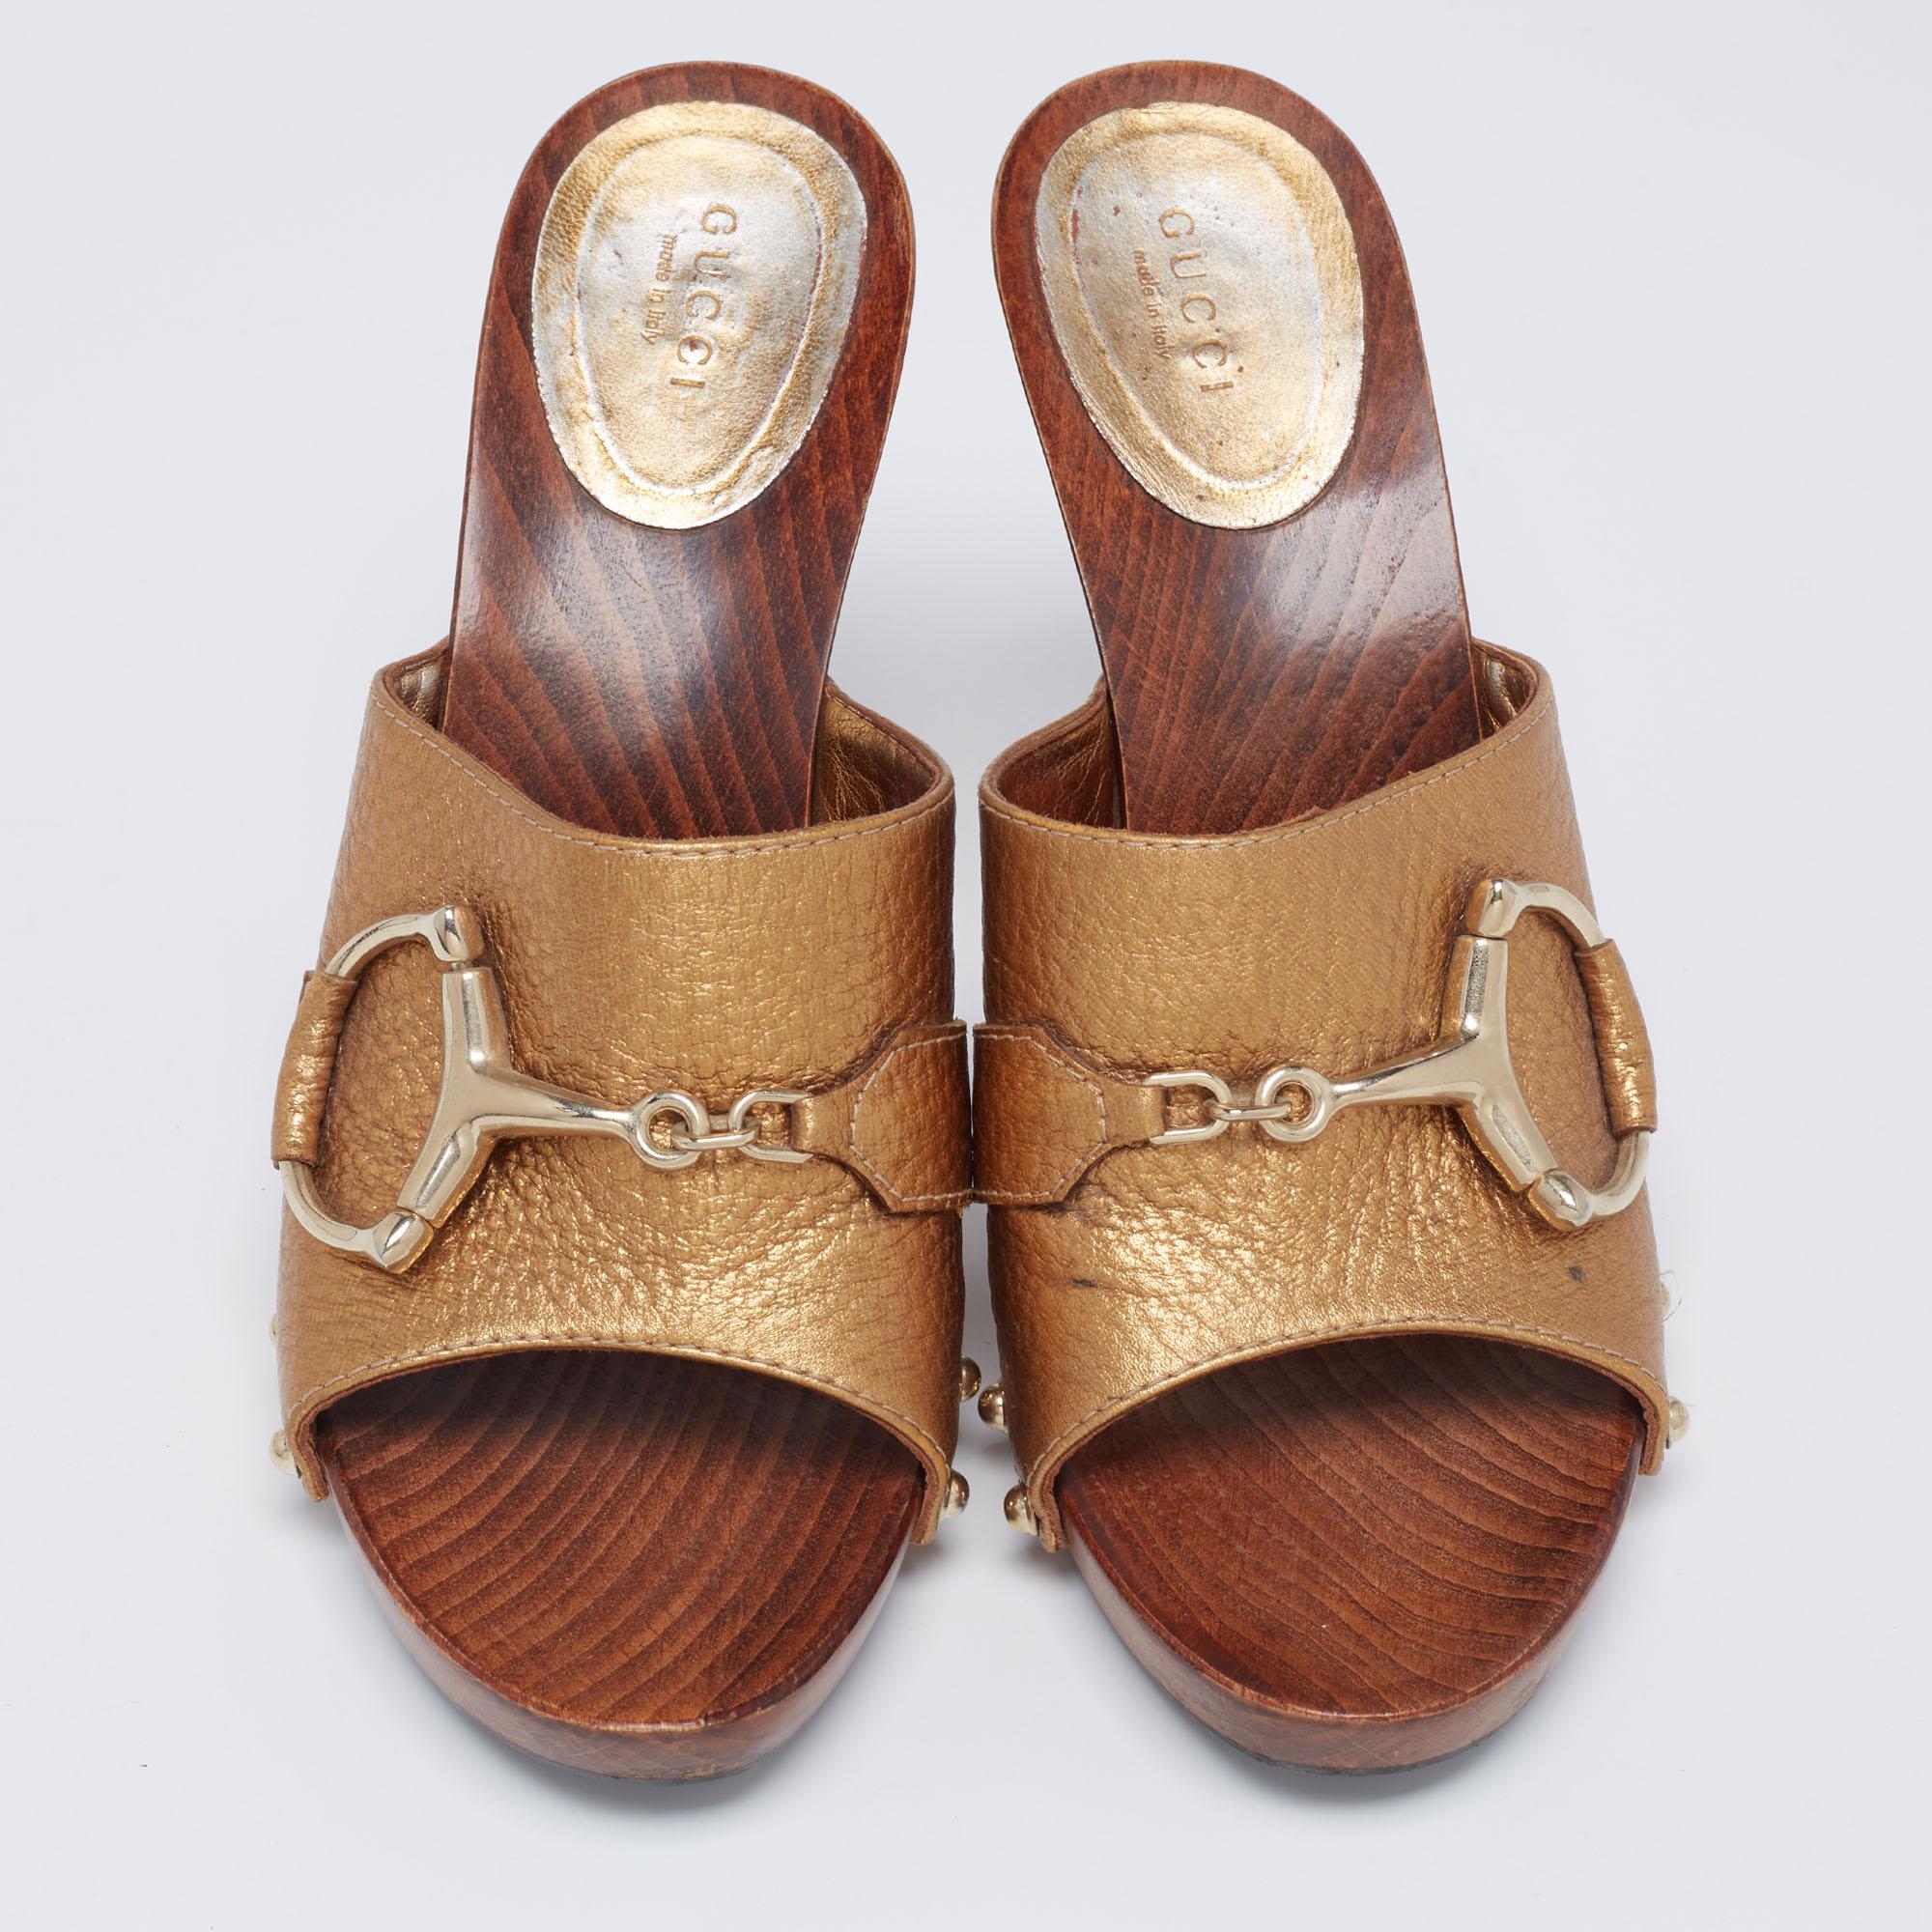 Look fabulous when you wear these Gucci copper-hued Icon Bit clogs. They are crafted from leather with gold-tone accents on the vamps and have 13 cm heels.

